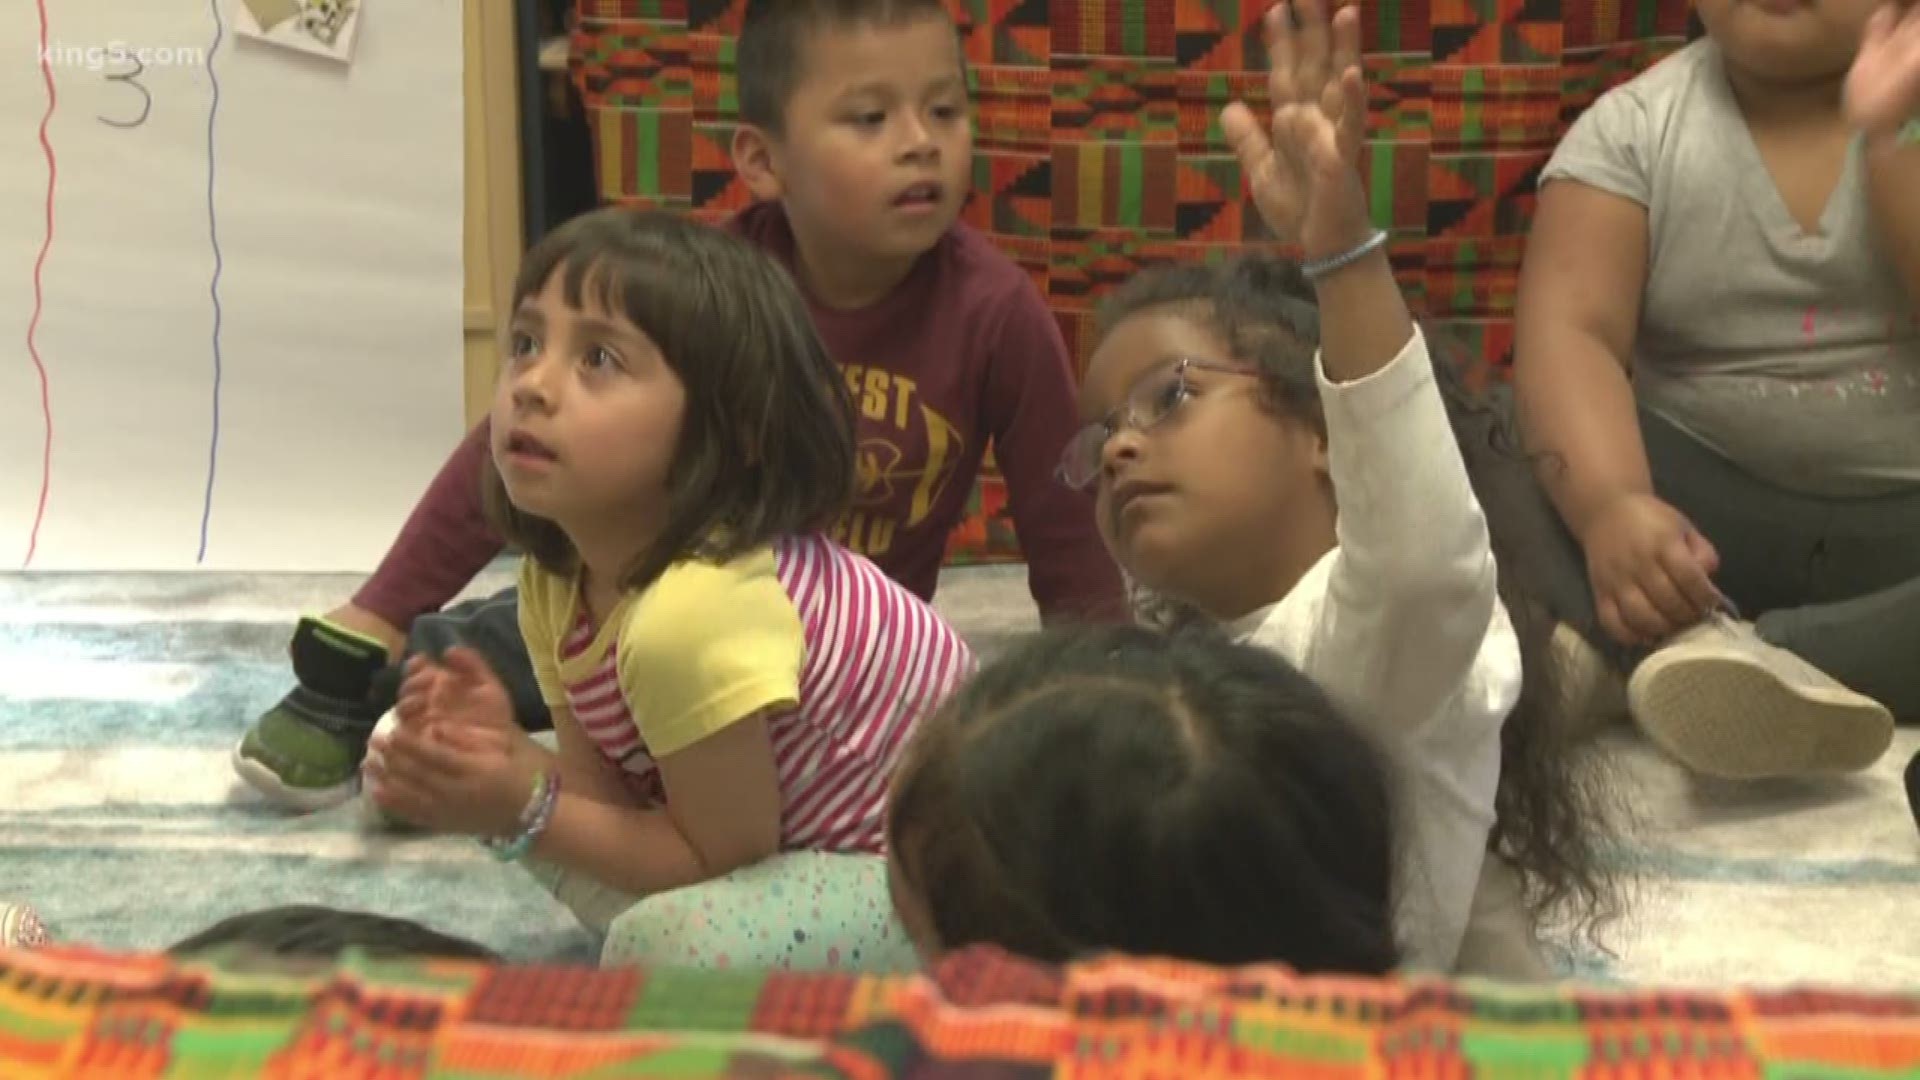 Seattle Children’s, who sponsored this story, is studying the "Fit 5 for Kids" program to see if limiting screen time can help Latino children who are at risk for obesity and related chronic diseases. Sponsored by Seattle Children's.